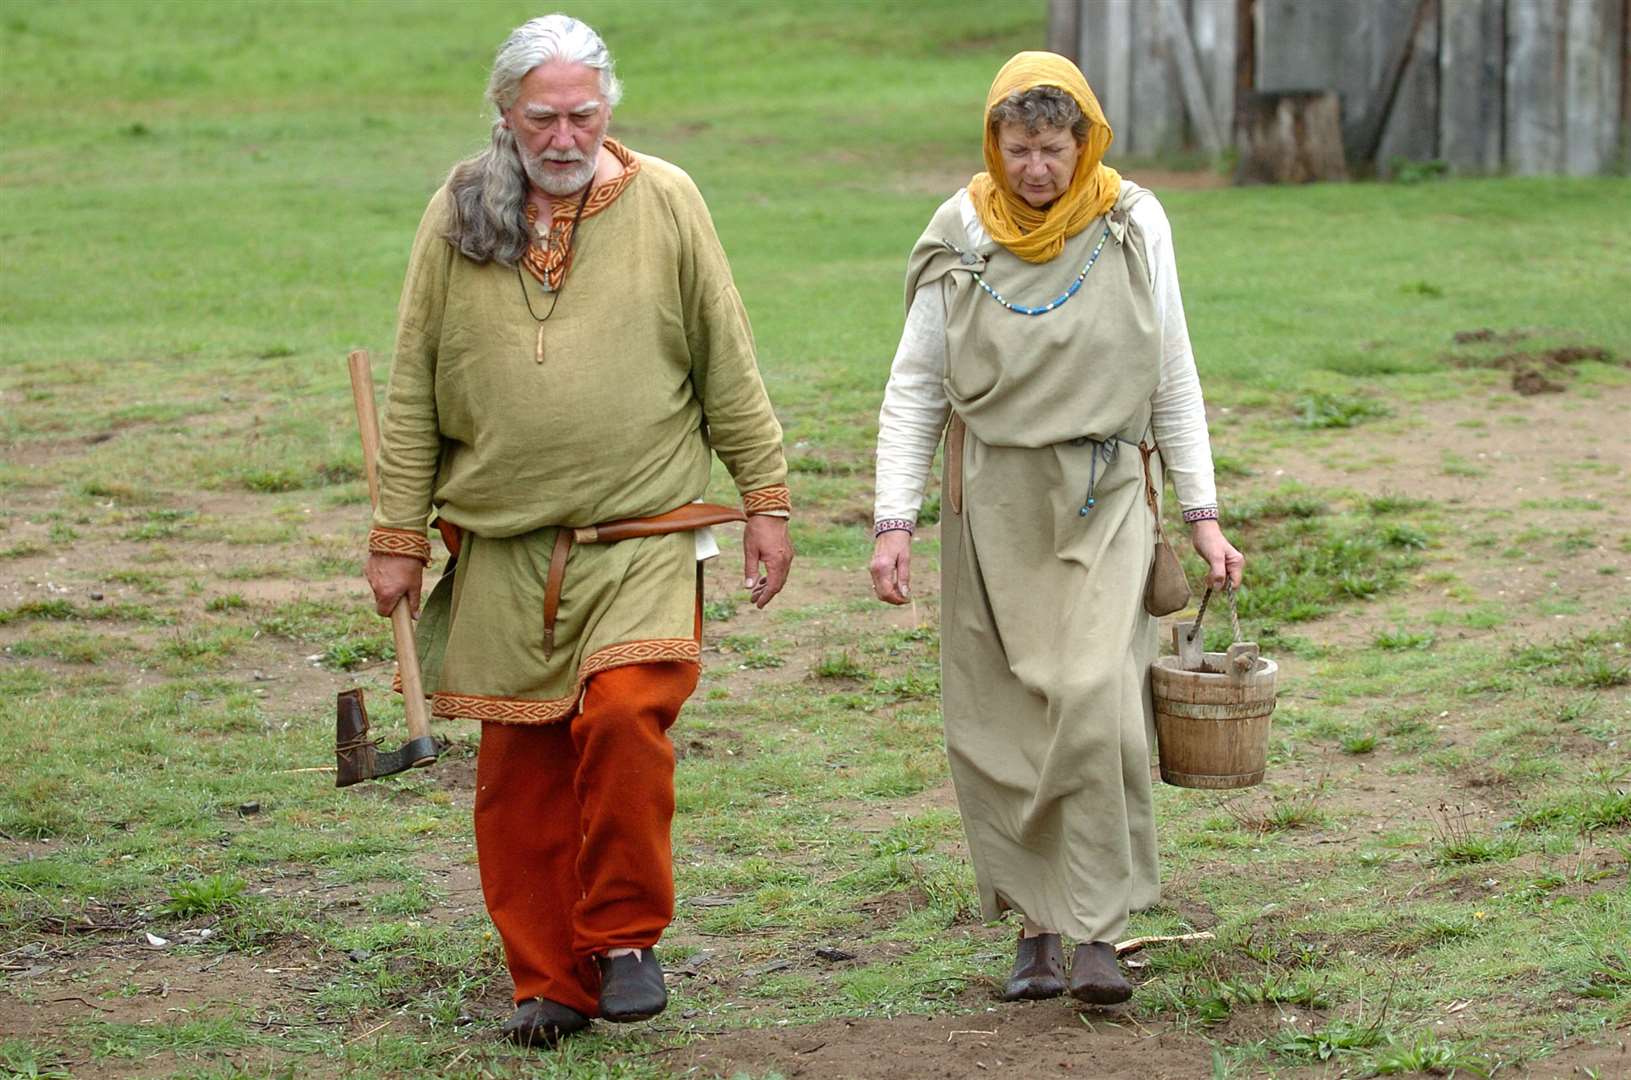 Chart existed in Anglo-Saxon times: re-enactors Janet and Bob Connelly